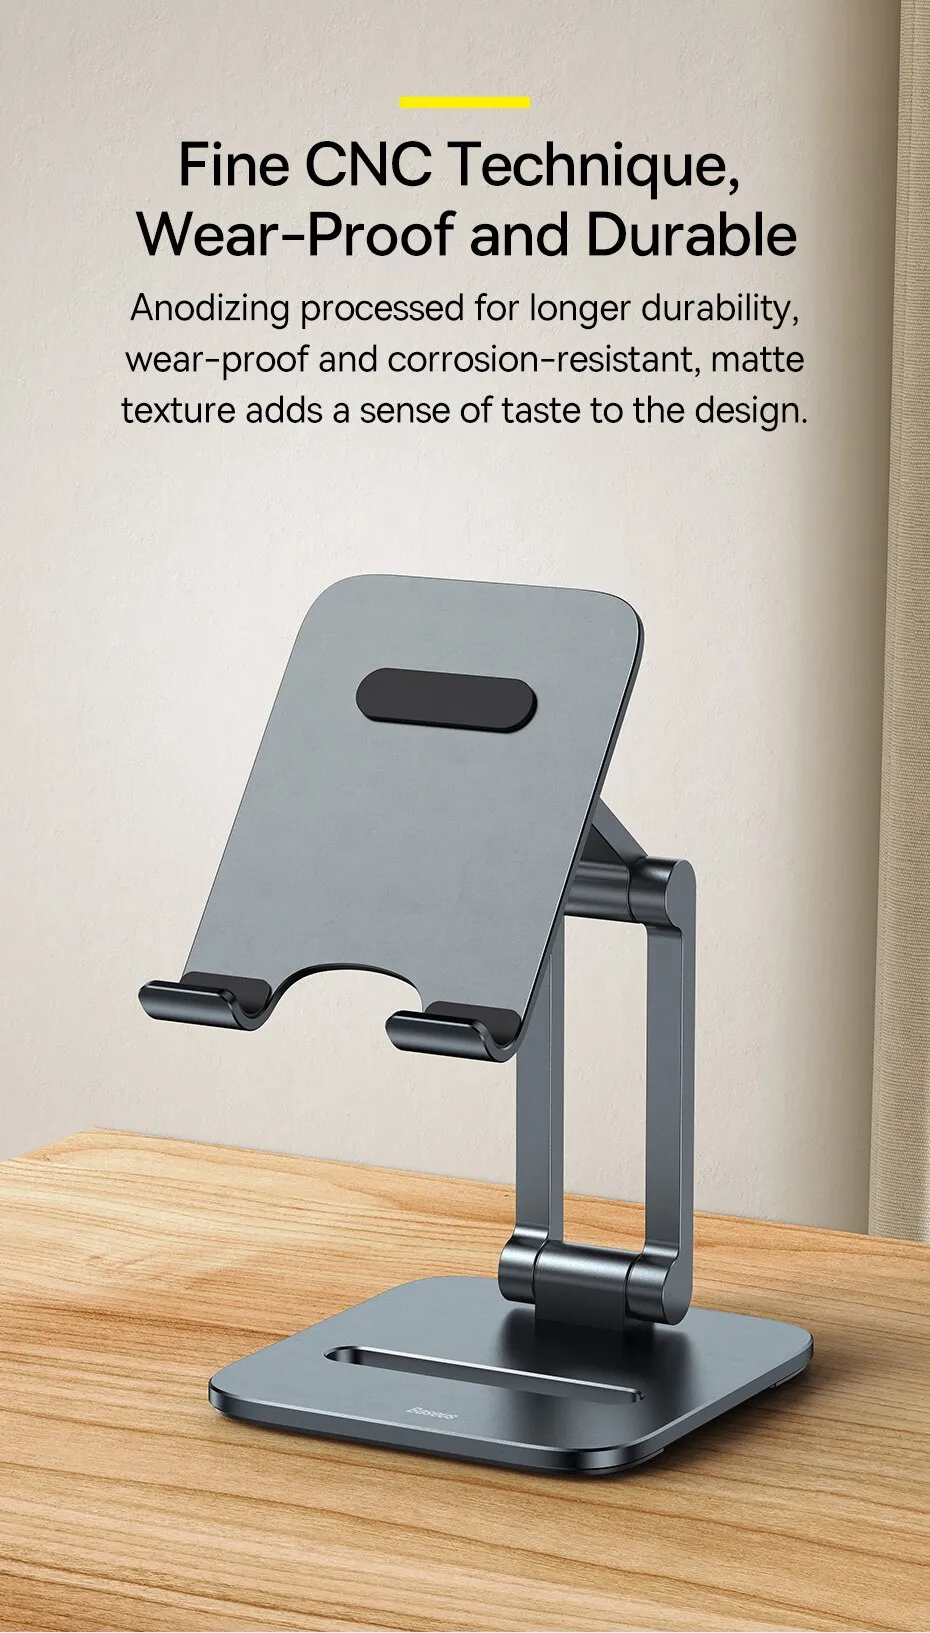 Buy Baseus Desktop Biaxial Foldable Metal Stand Price In Pakistan available on techmac.pk we offer fast home delivery all over nationwide.